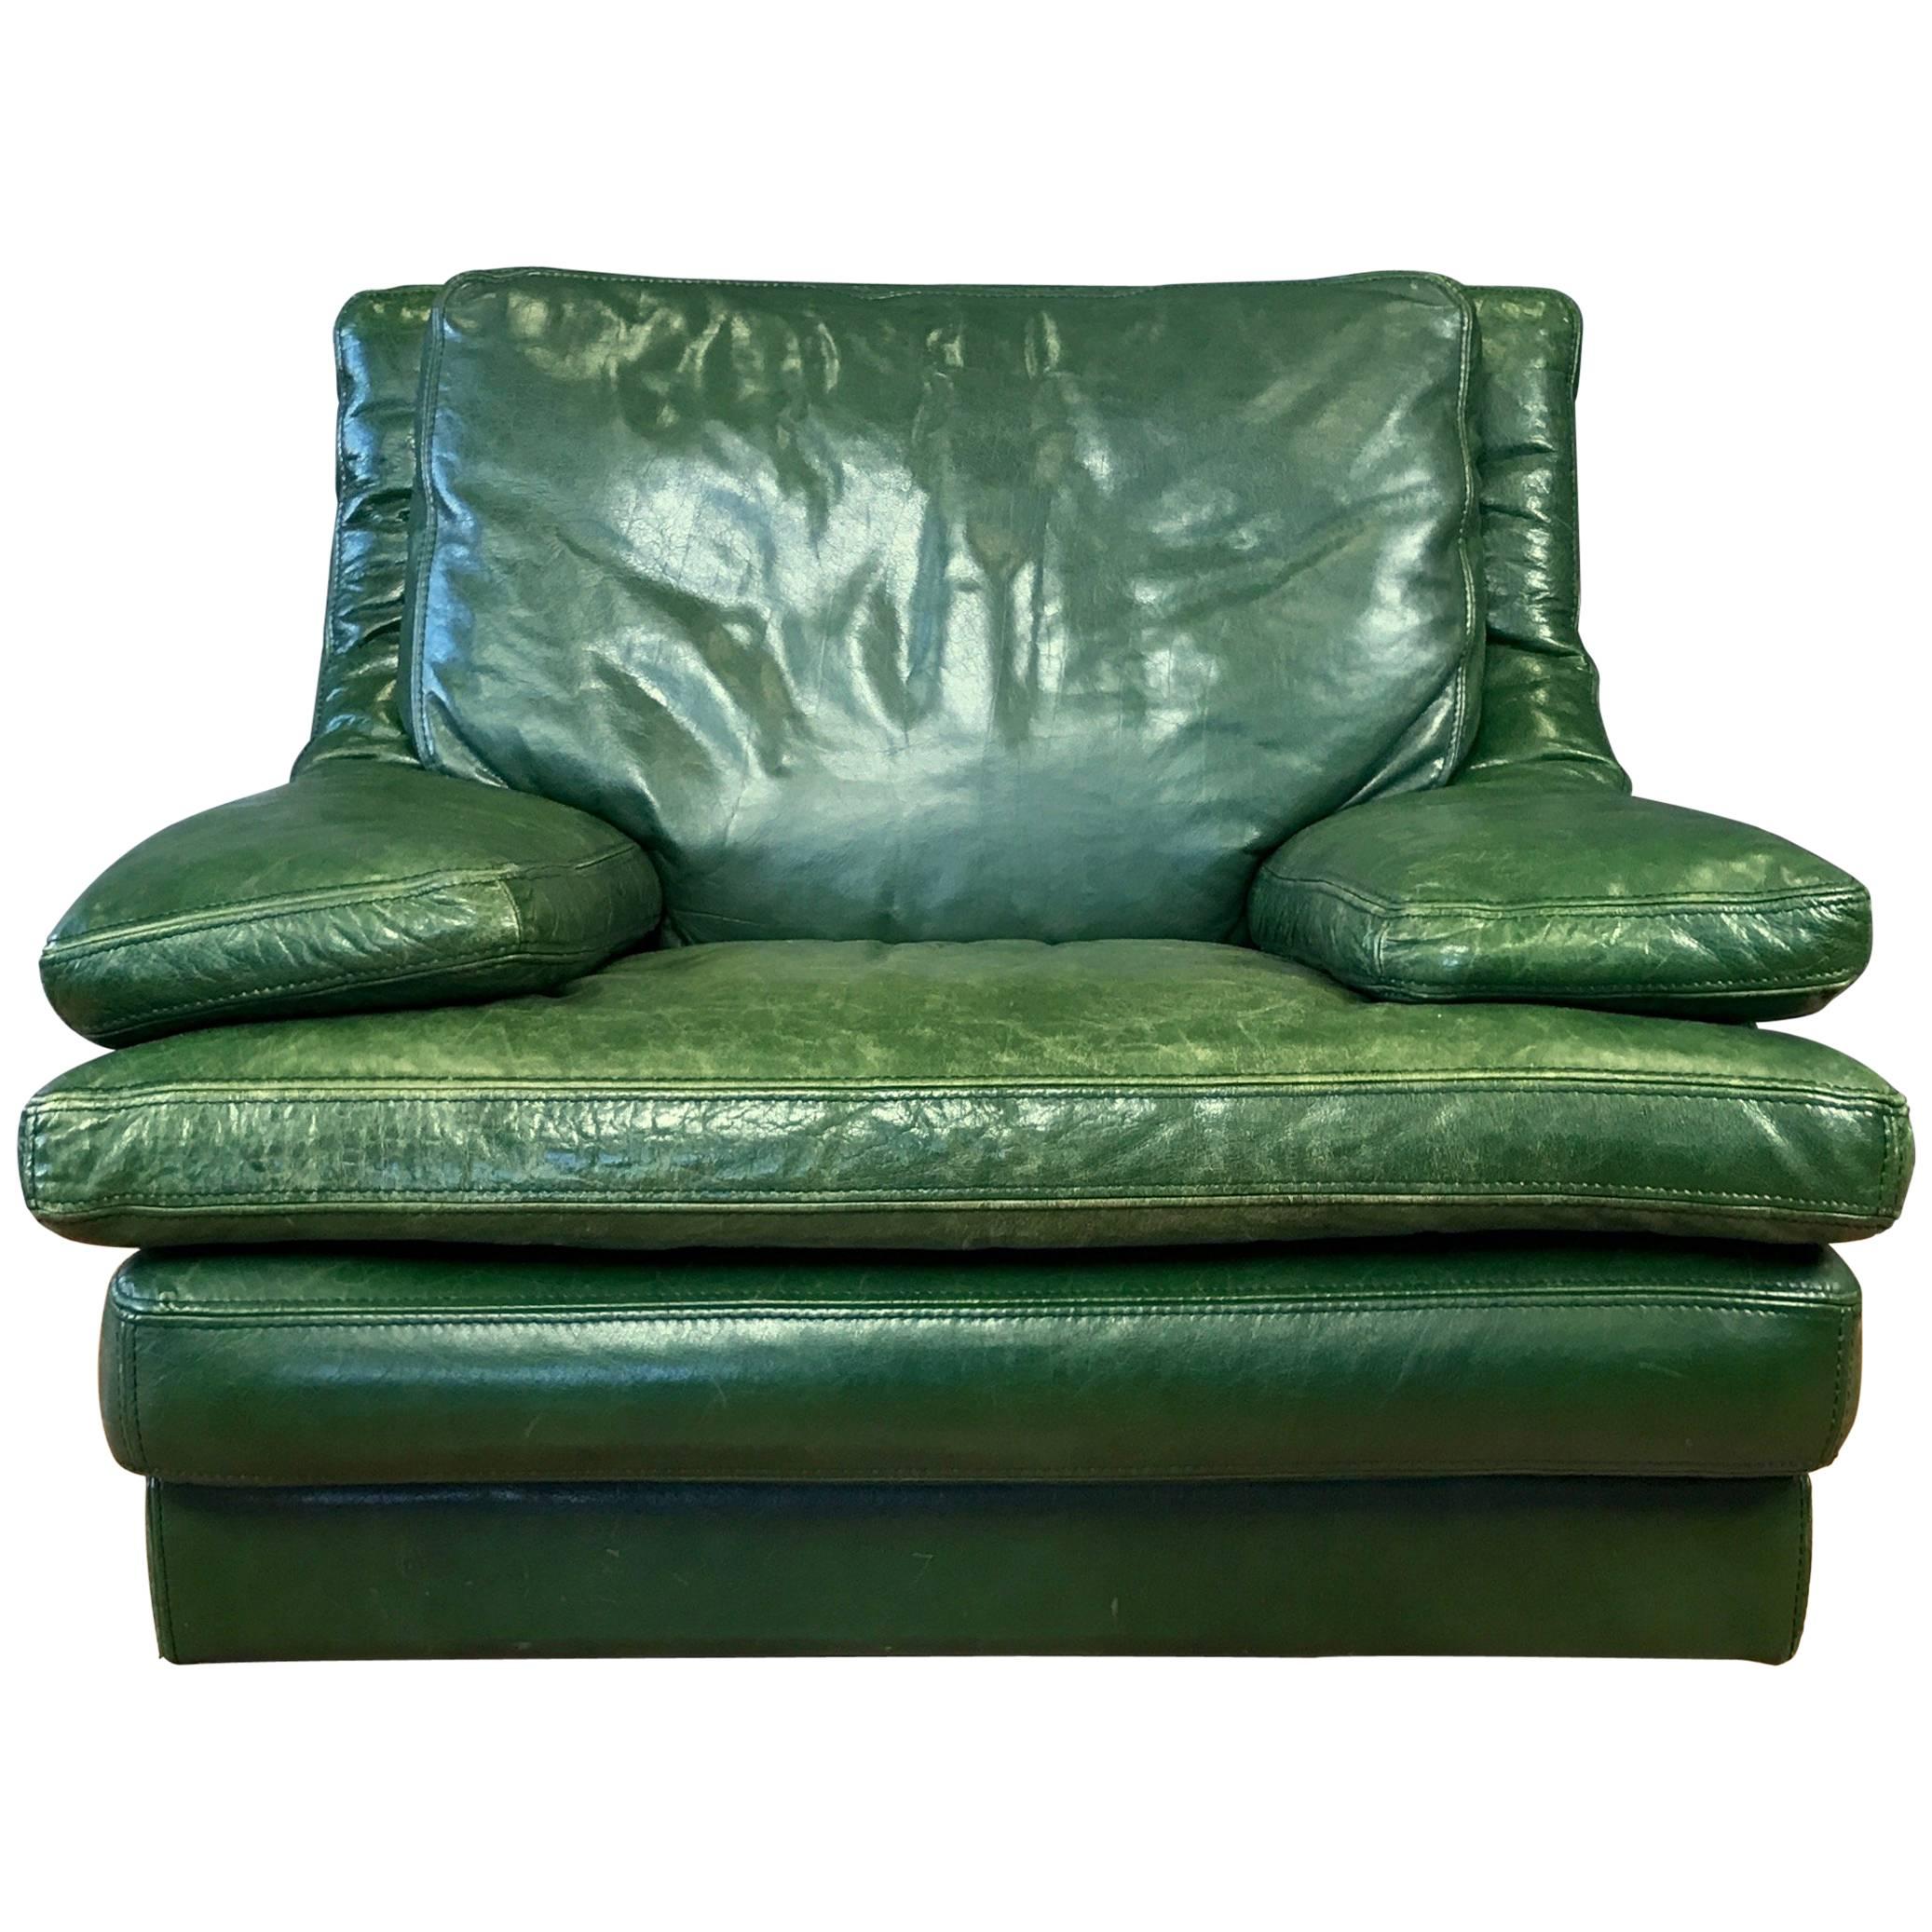 Vintage Roche Bobois Green Leather Lounge Chair